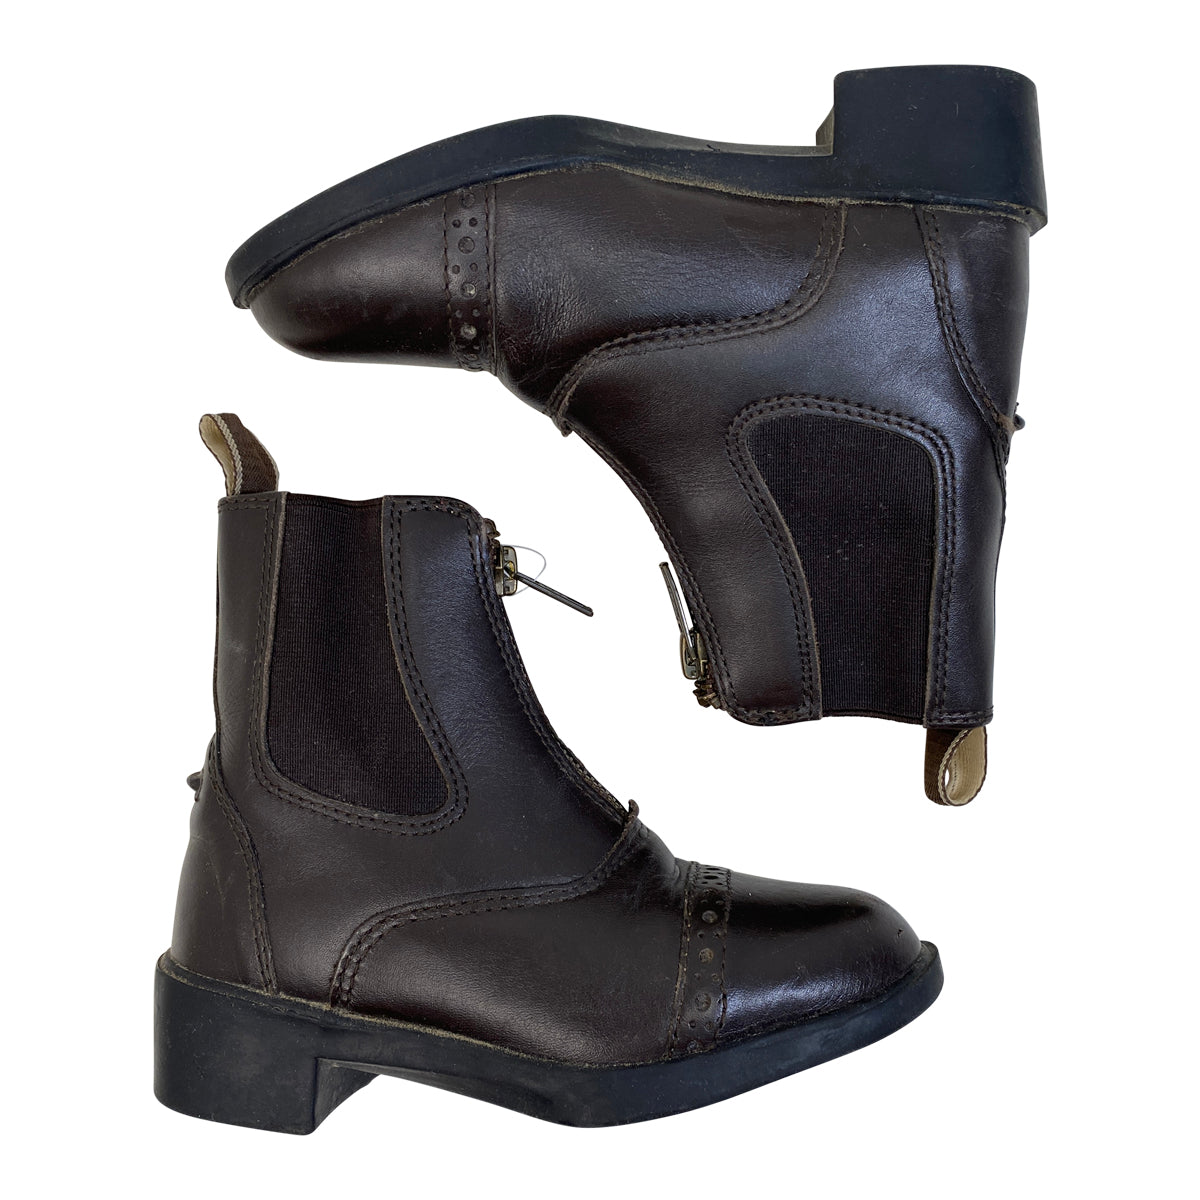 Ovation Sport Rider II Paddock Boots in Brown